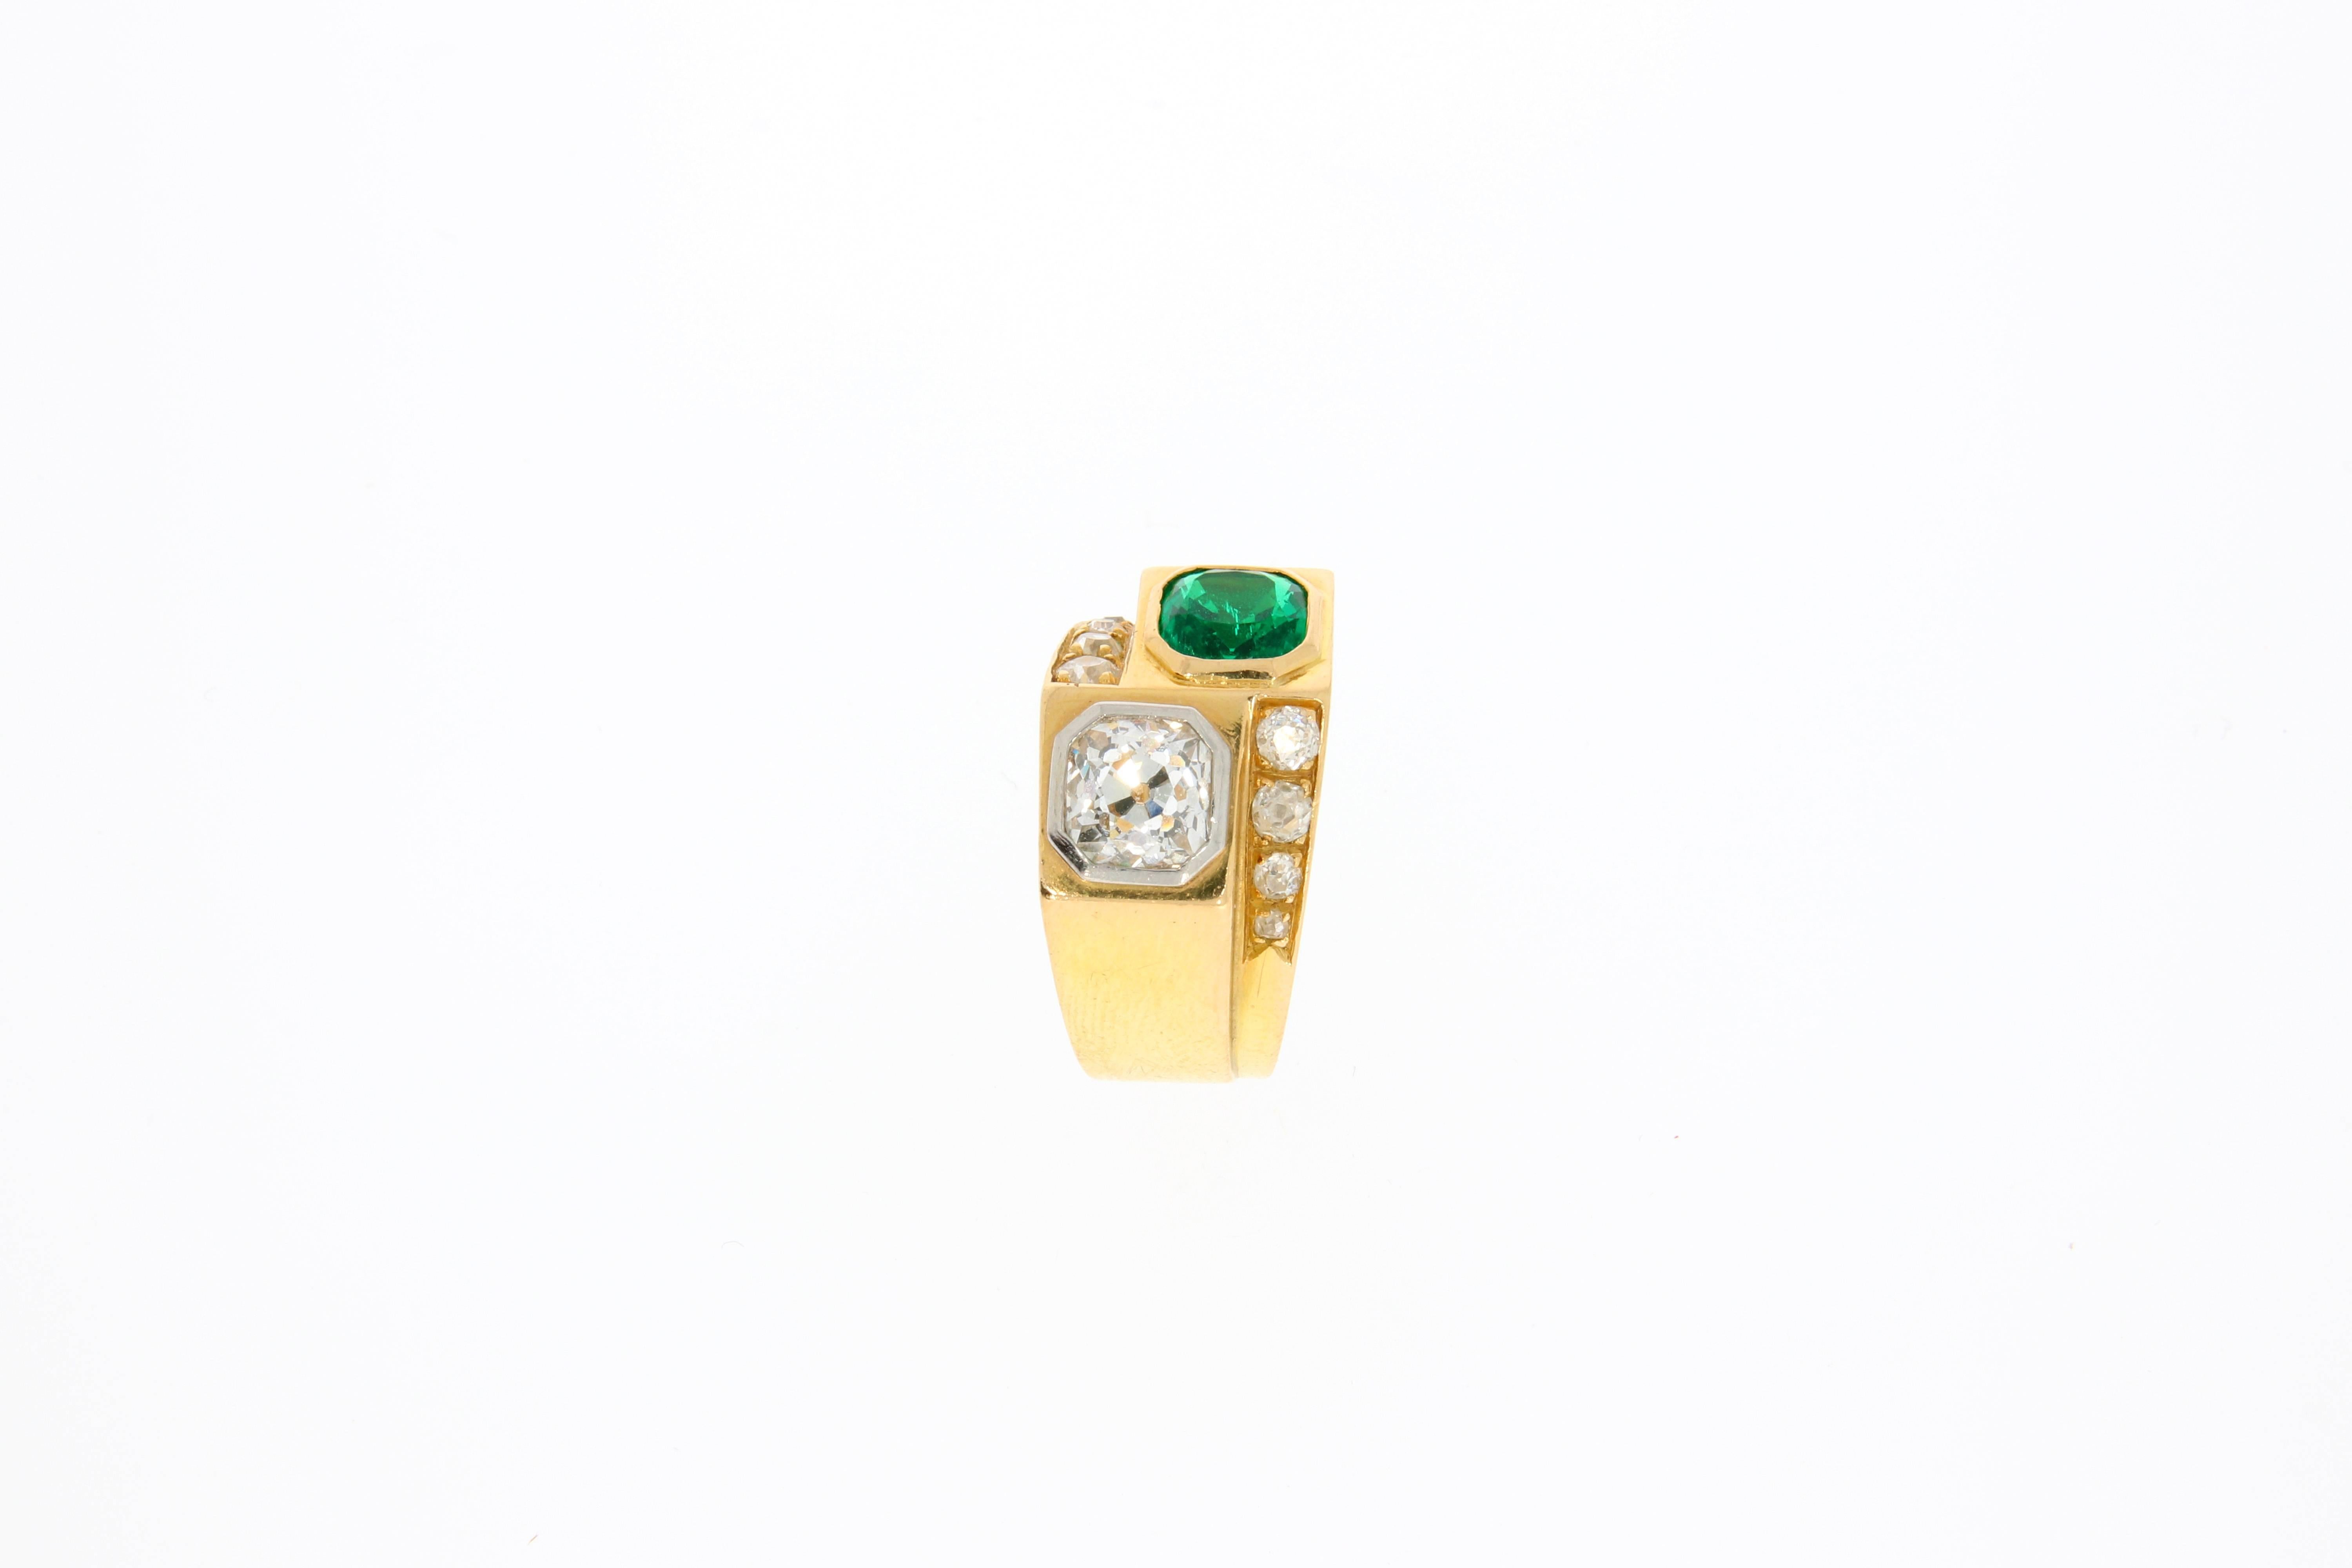 Boivin Diamond Smaragd Yellow Gold Ring, 1945 In Excellent Condition For Sale In Munich, DE